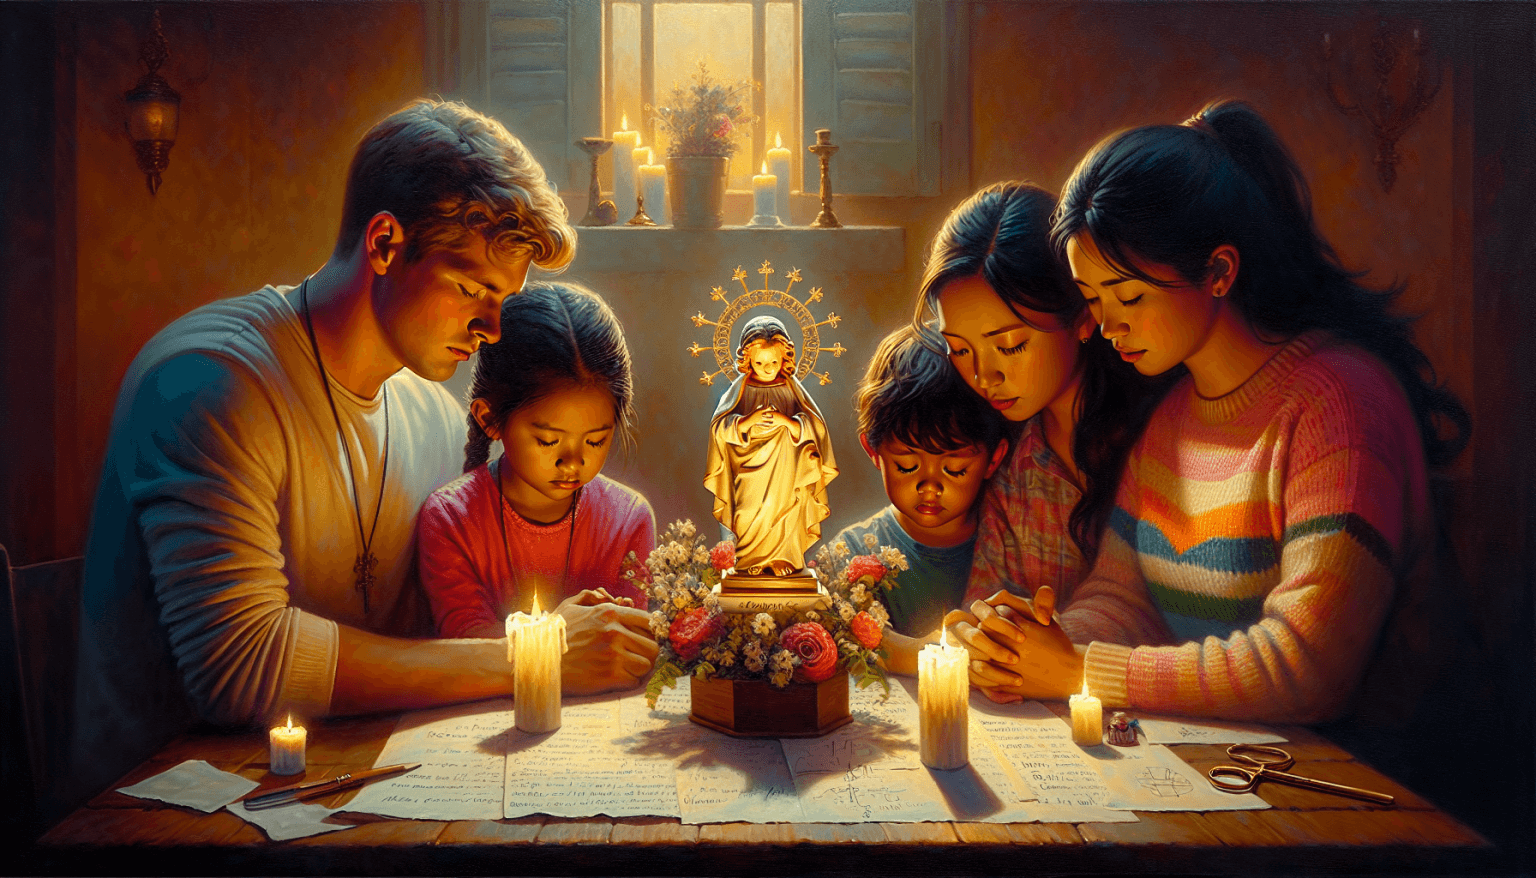 Painting of a serene and colorful scene where a young family is gathered in a humble, candle-lit home, praying to a small statue of the Divino Niño Jesús placed prominently on a simple wooden table, s